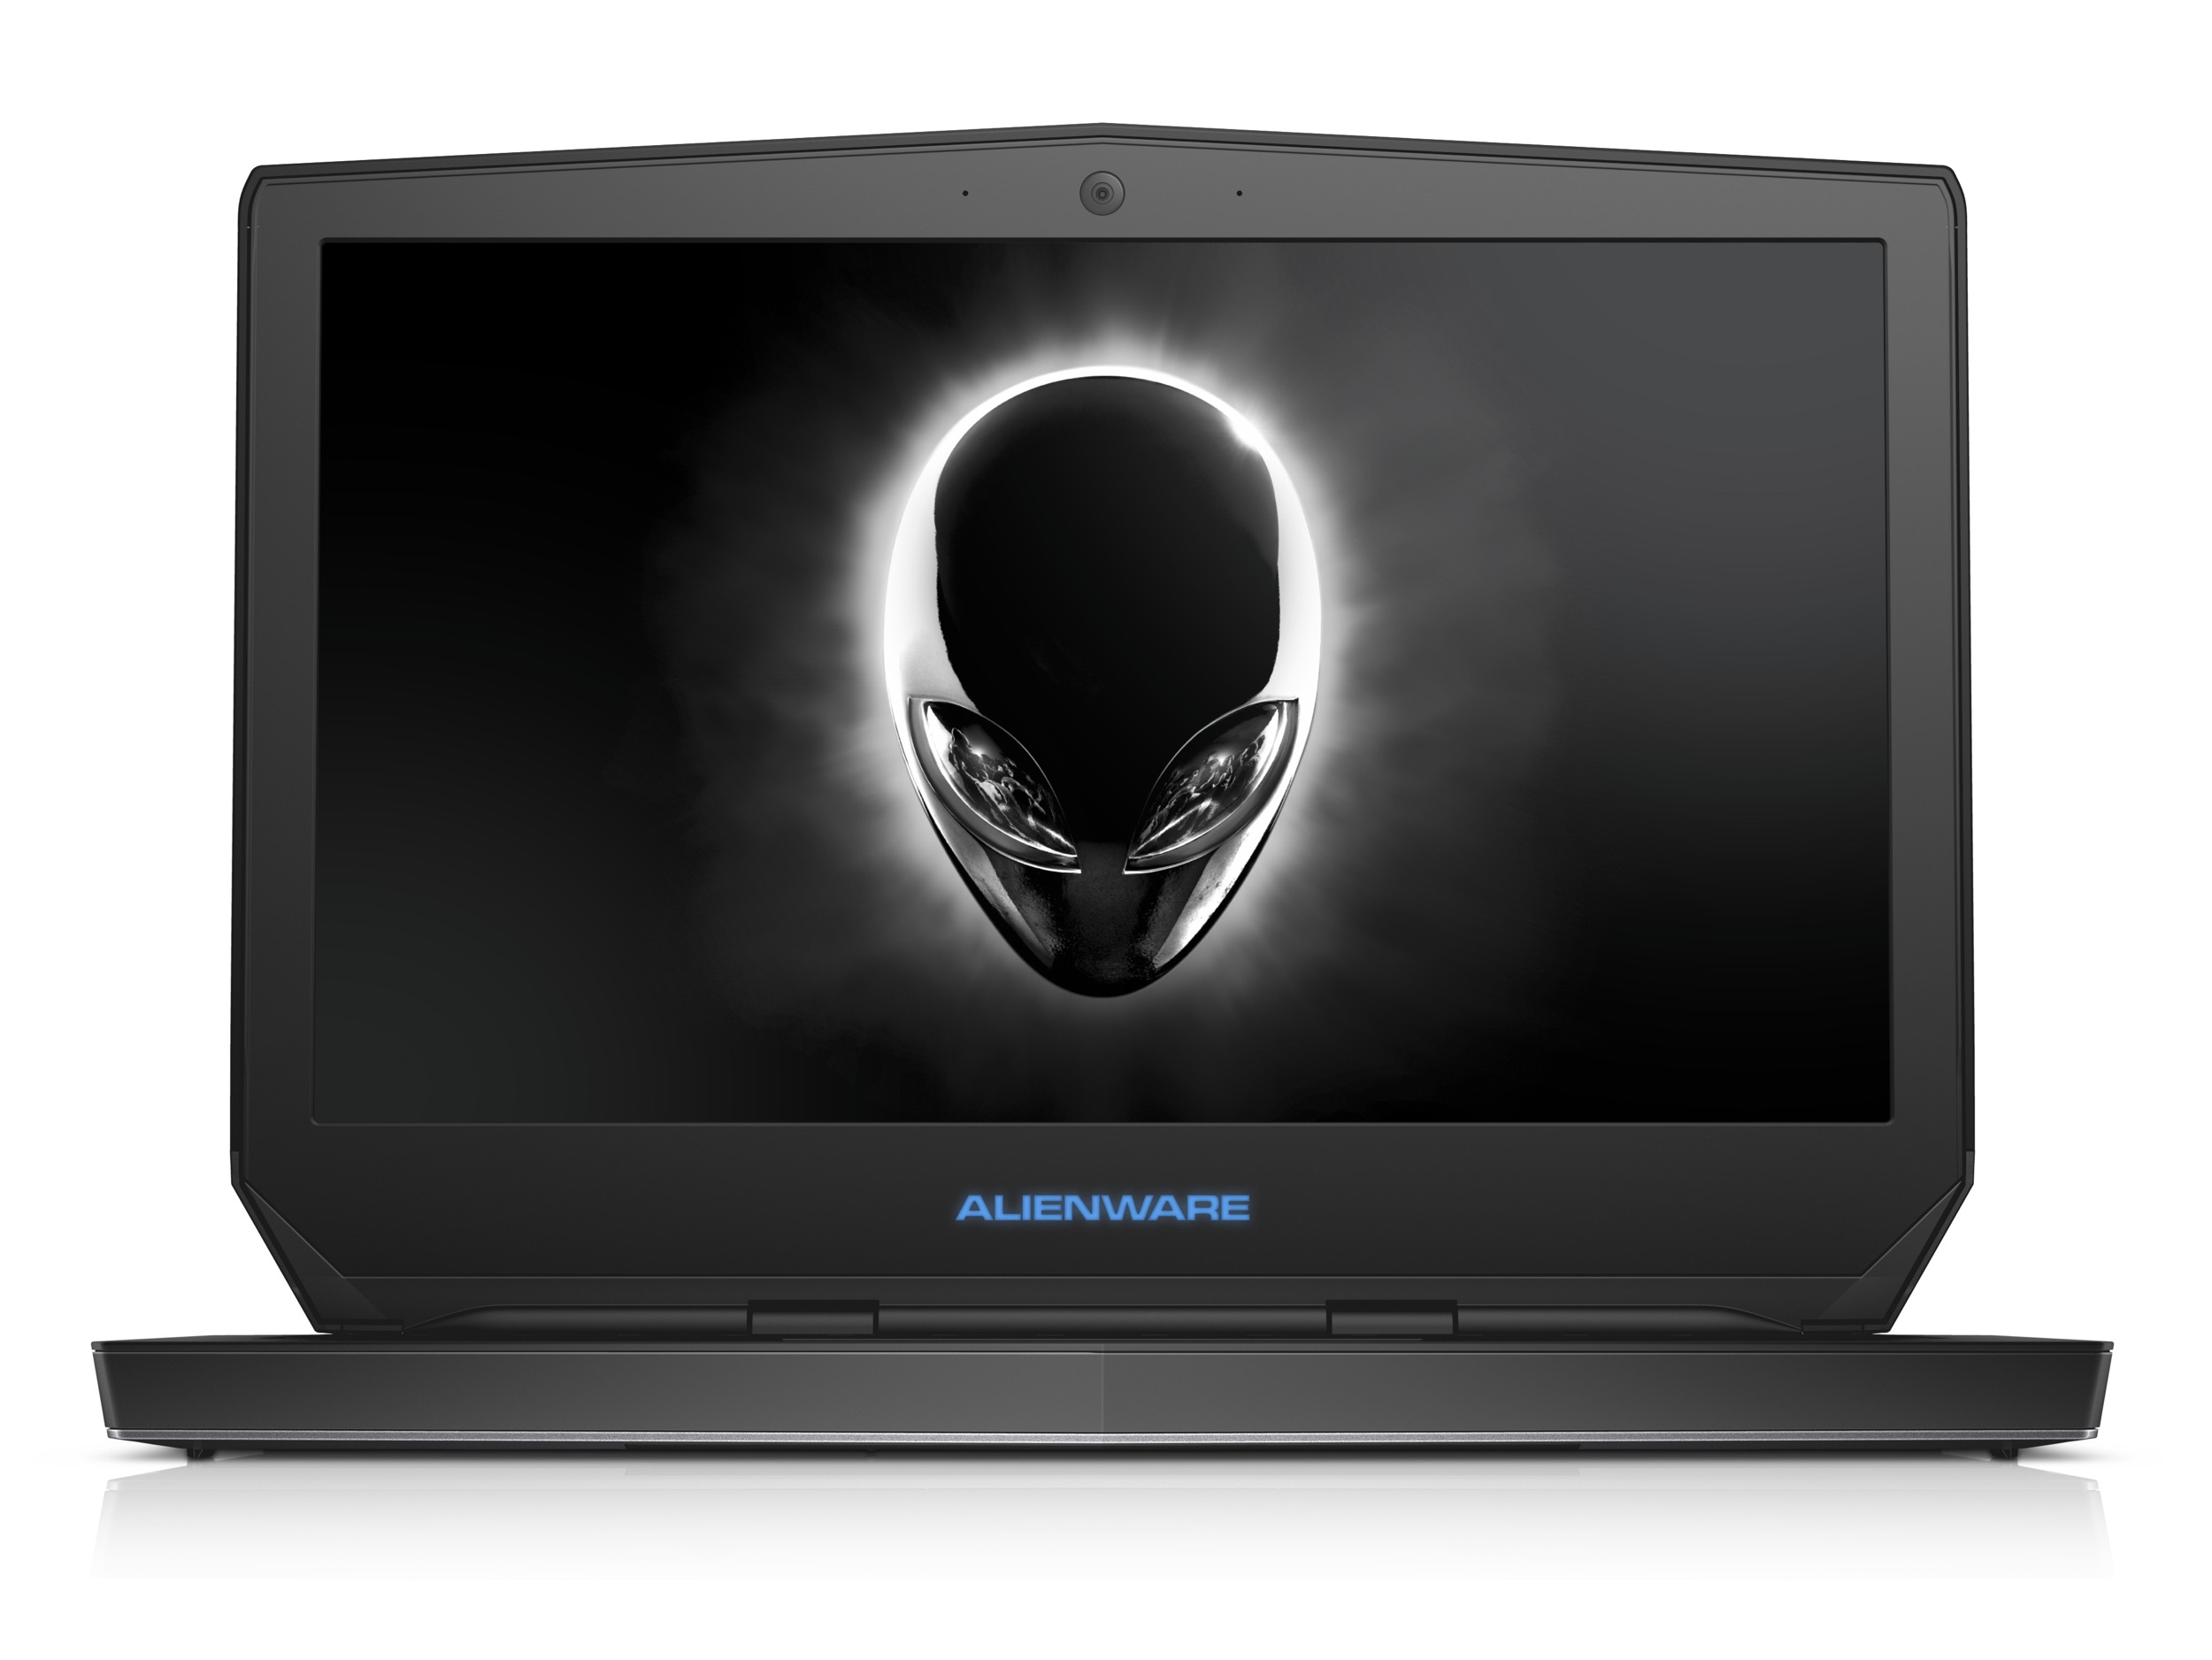 Dell Alienware 13 Notebook Review - NotebookCheck.net Reviews